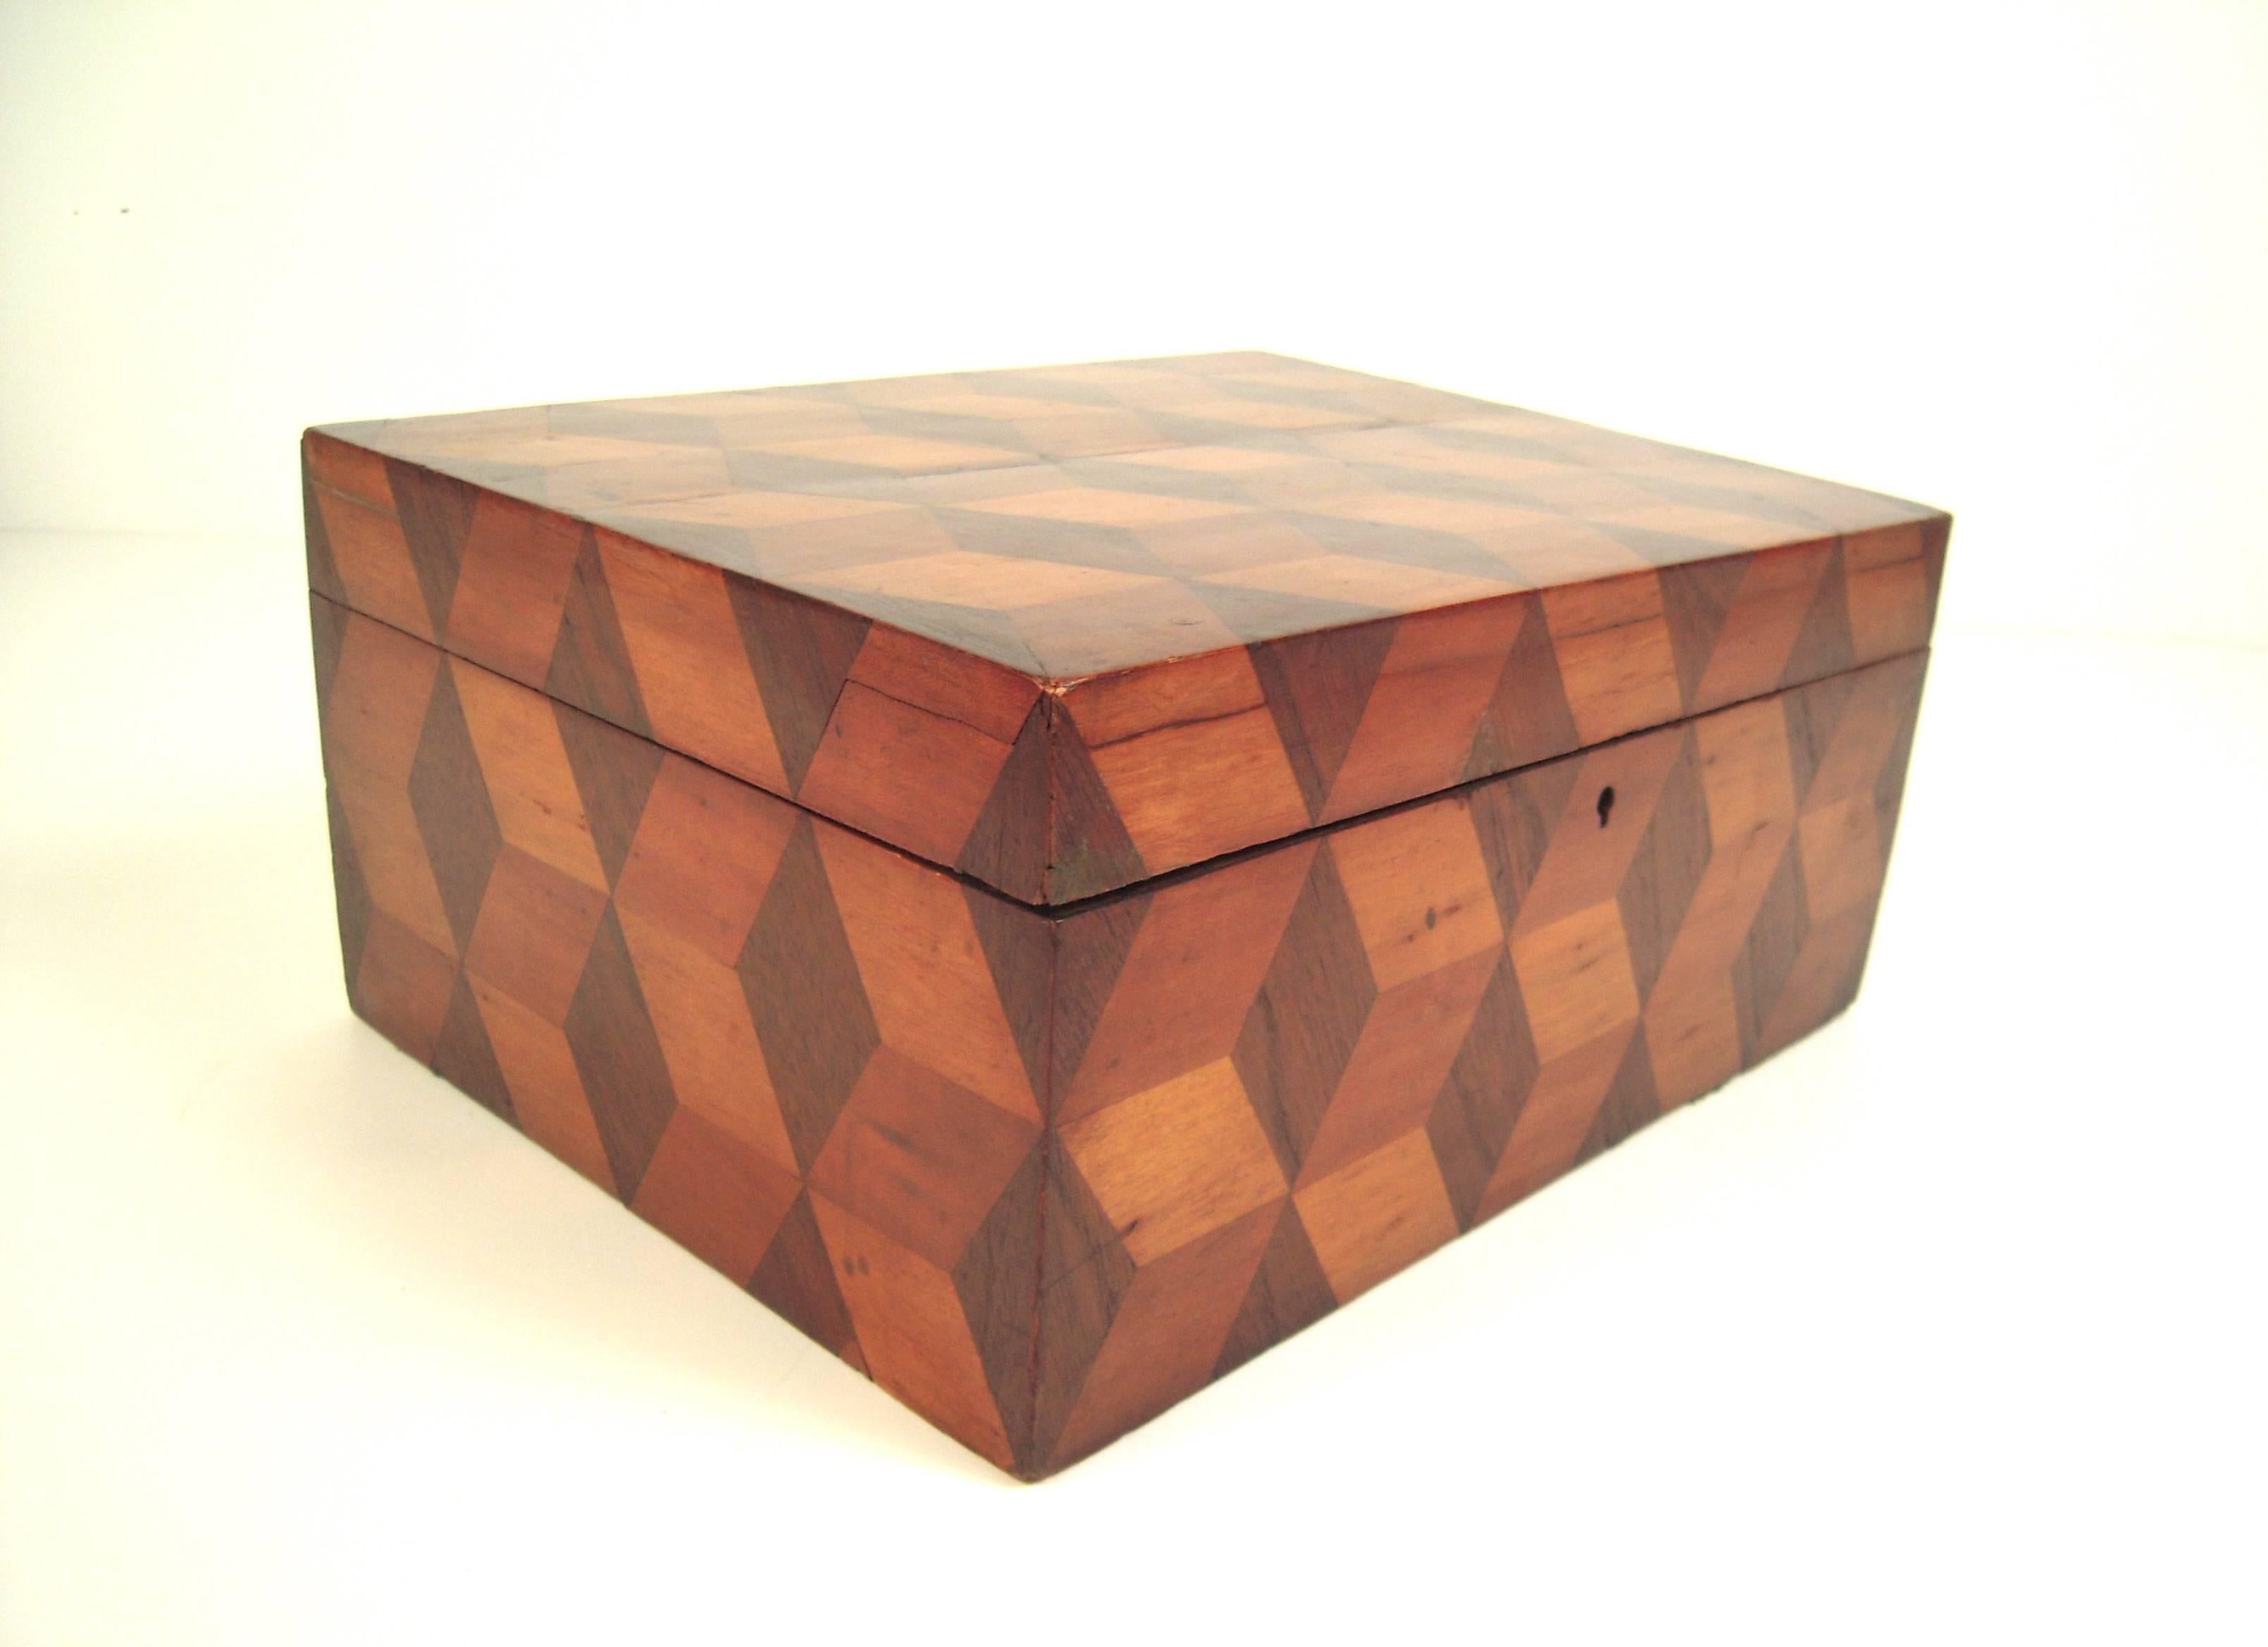 A graphic, 19th century American rectangular marquetry box, inlaid with contrasting light and dark woods, in the tumbling block pattern which is three dimensional and 